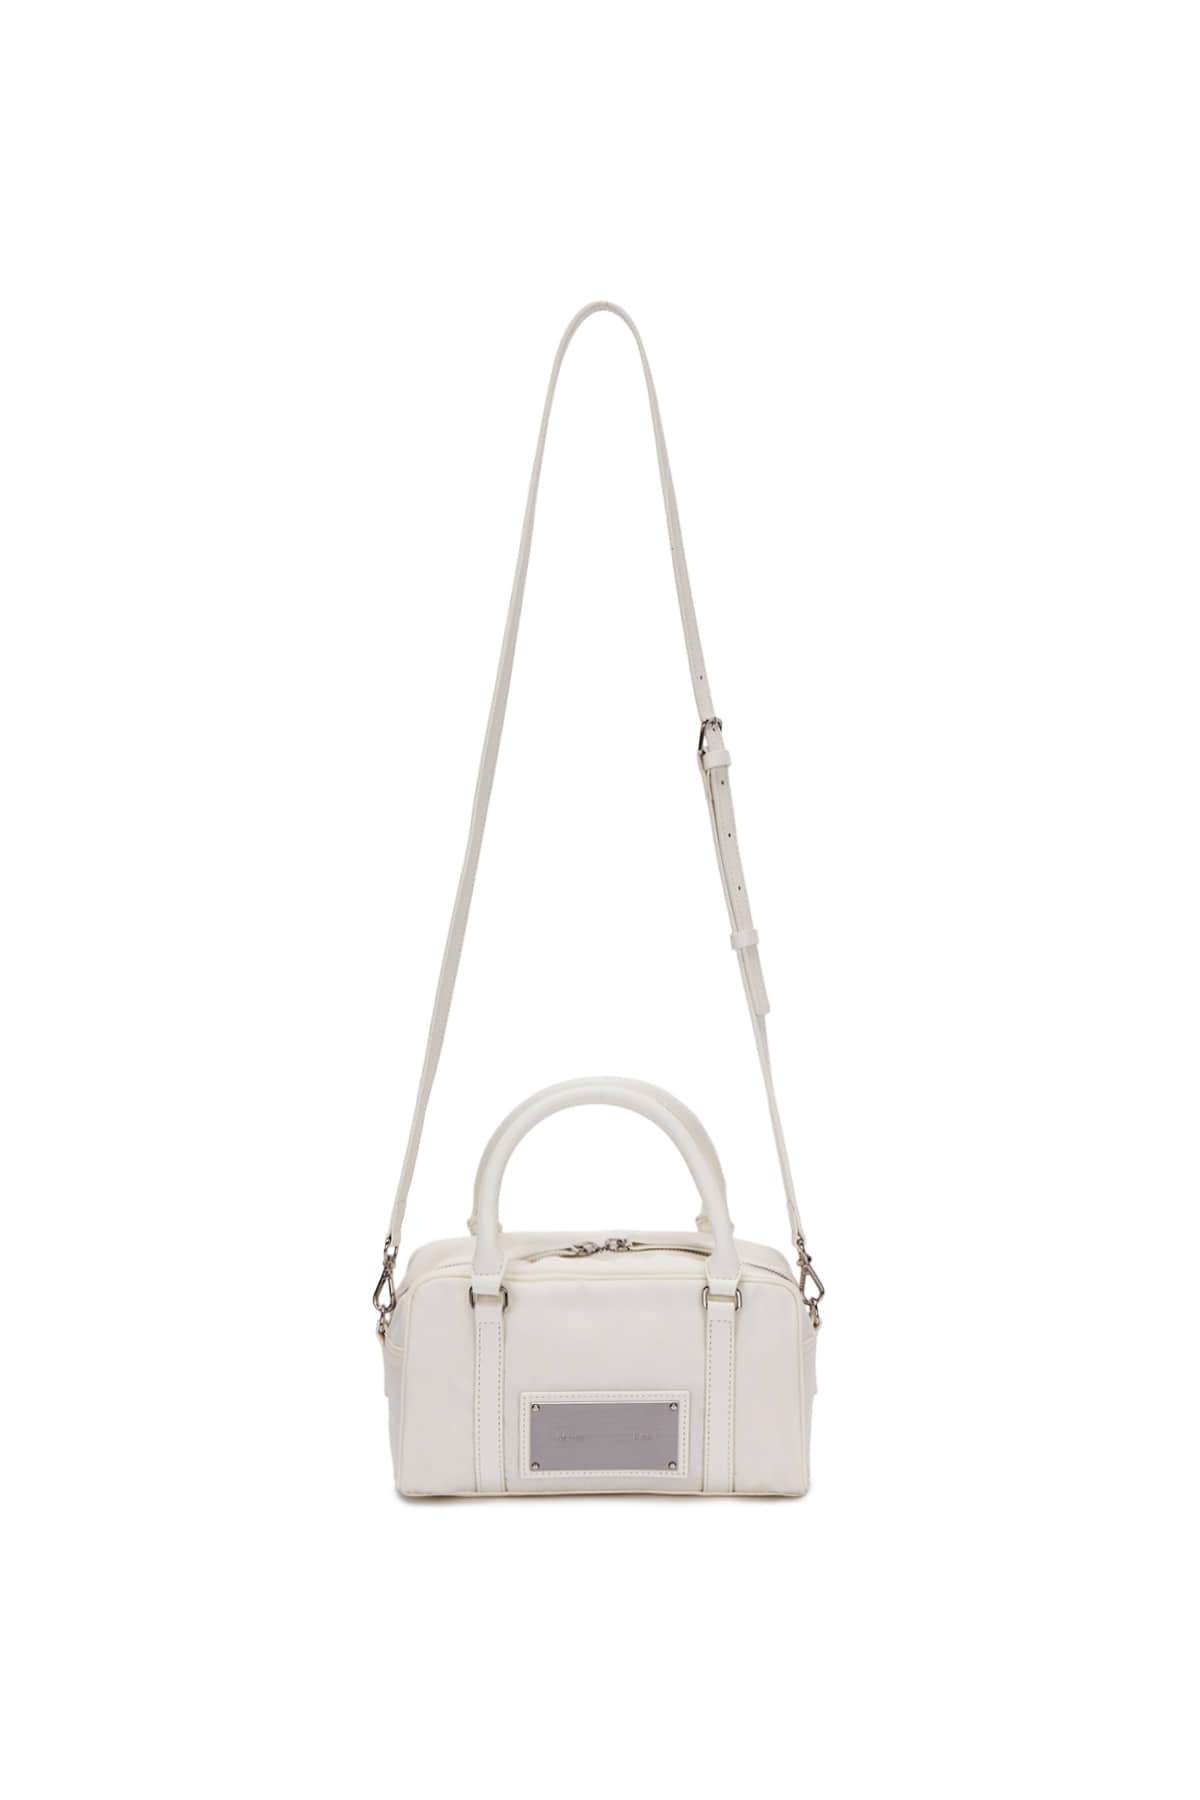 BABY SPORTY TOTE BAG IN IVORY